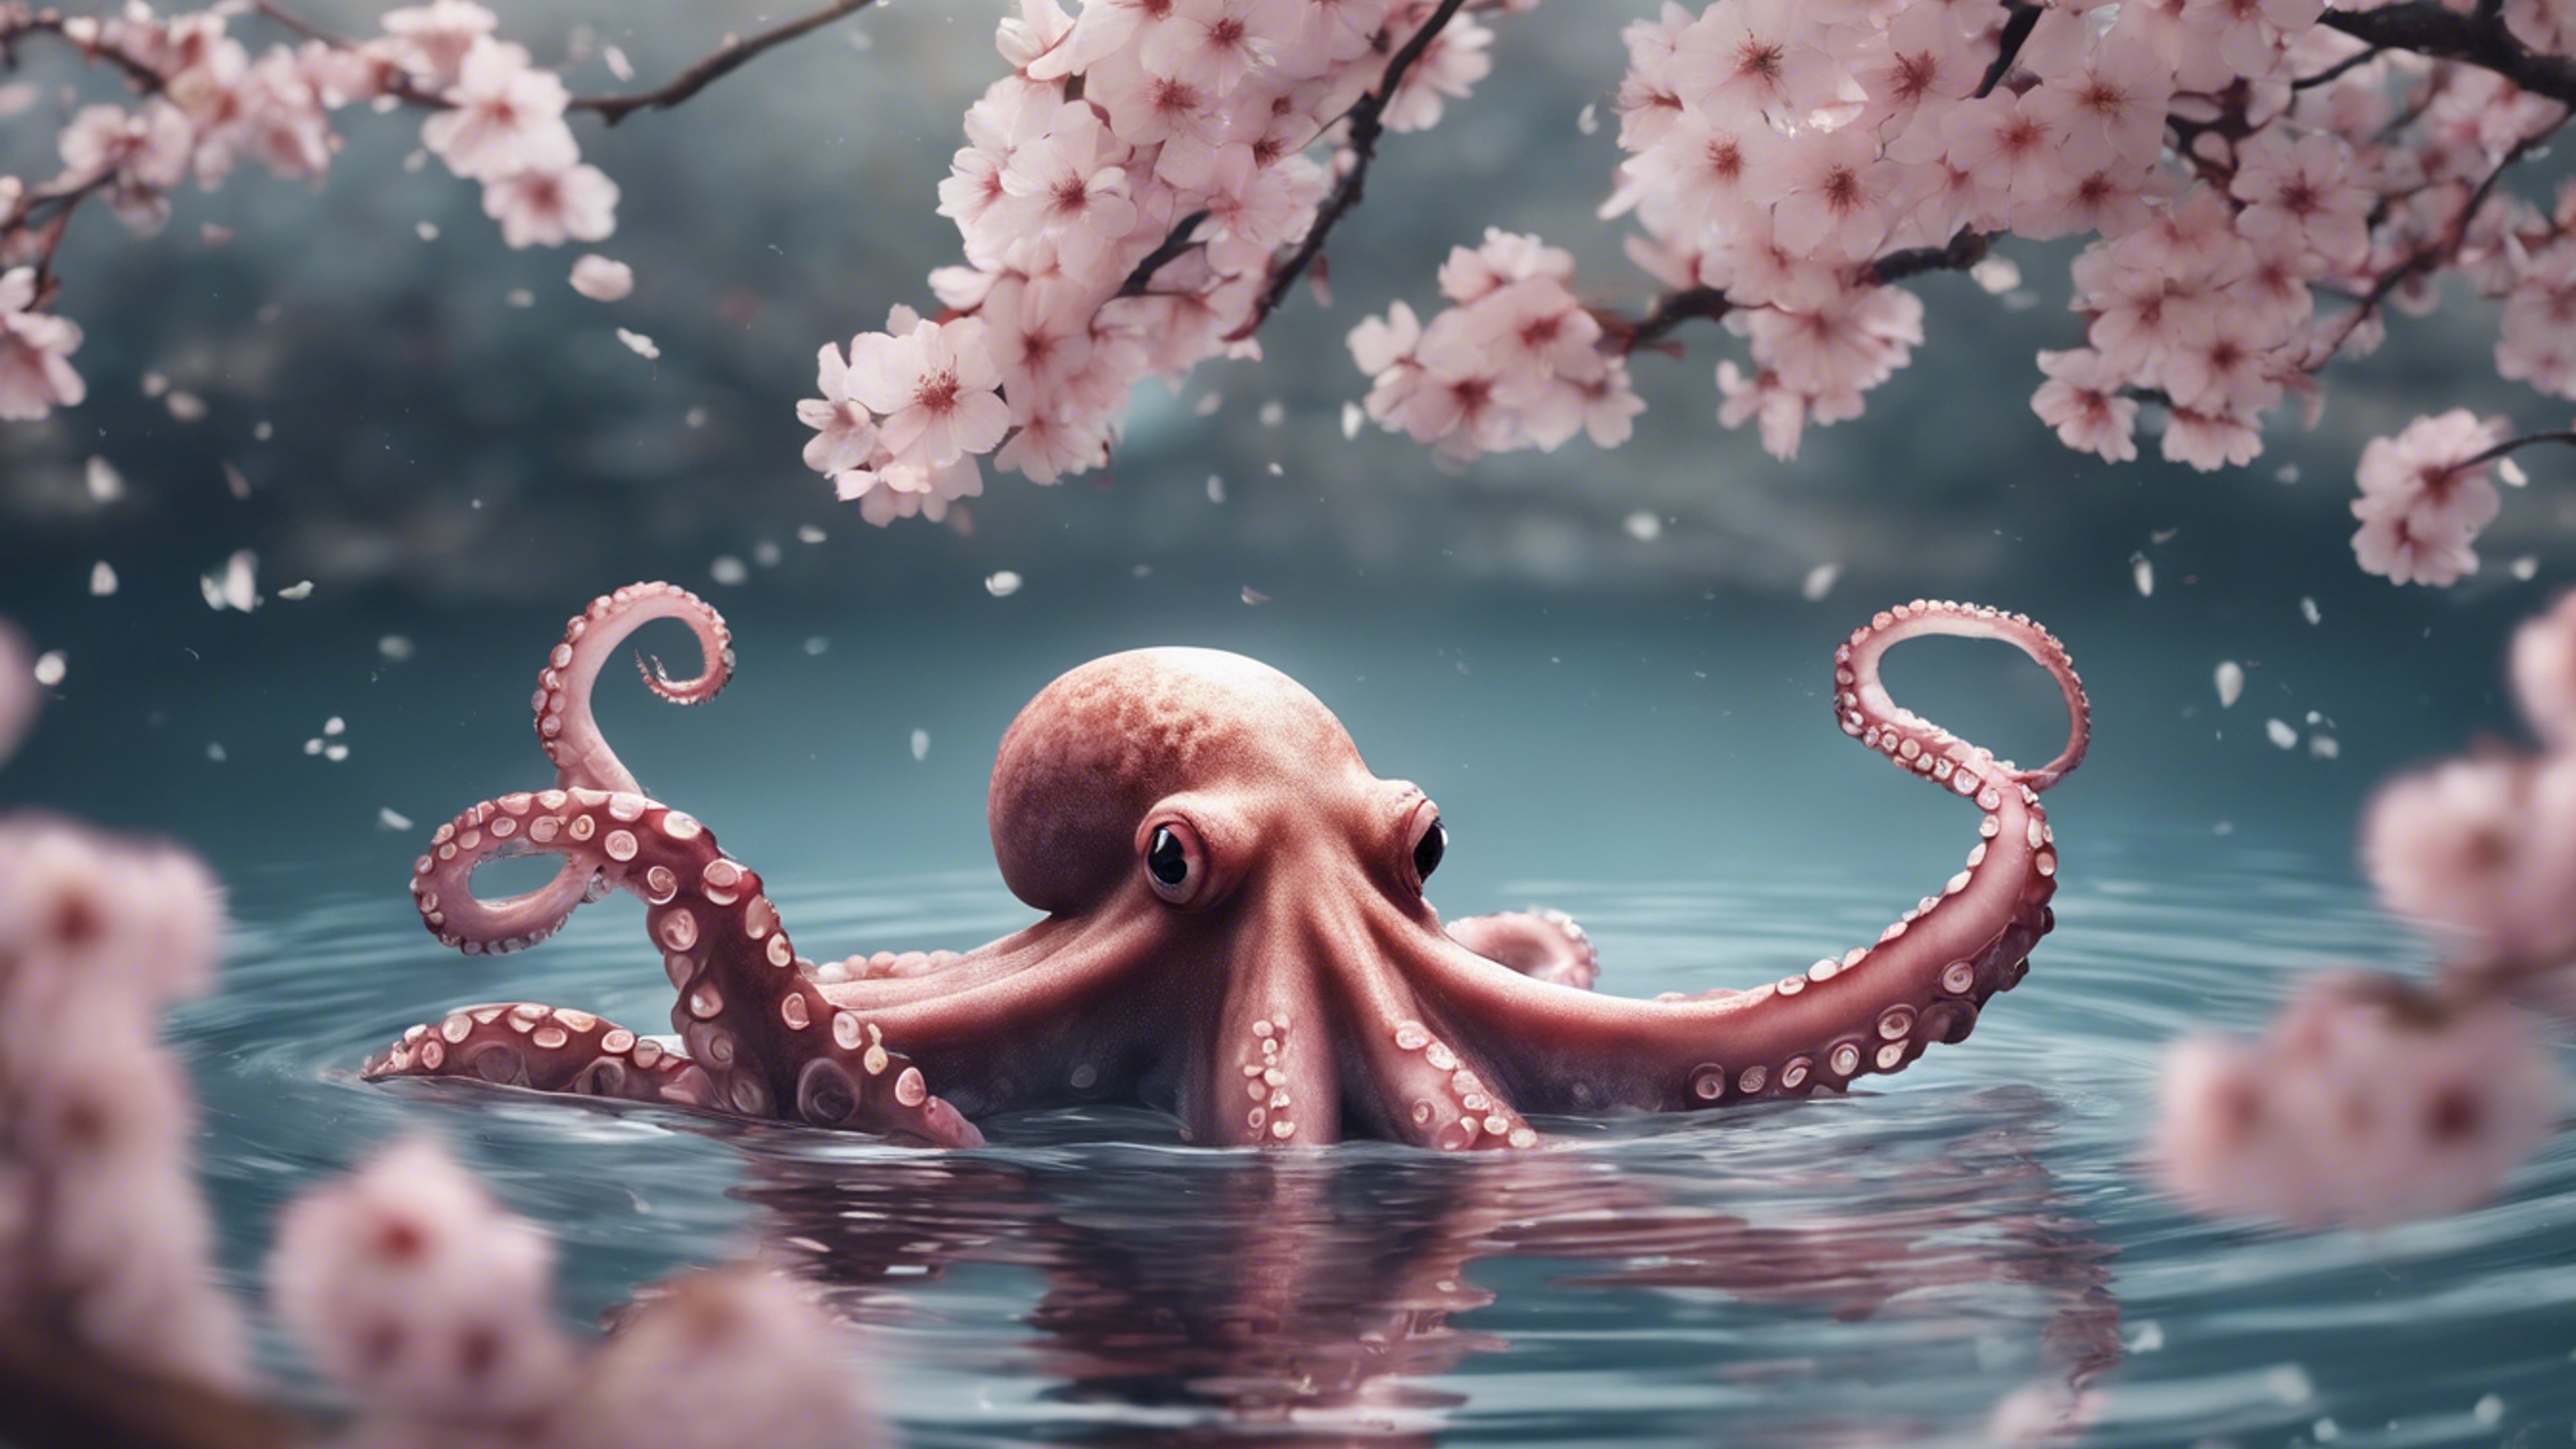 A sketch of an octopus floating peacefully in the water, with Japanese cherry blossoms gracefully falling around. Fond d'écran[a4f14d80ca6f4b538d98]